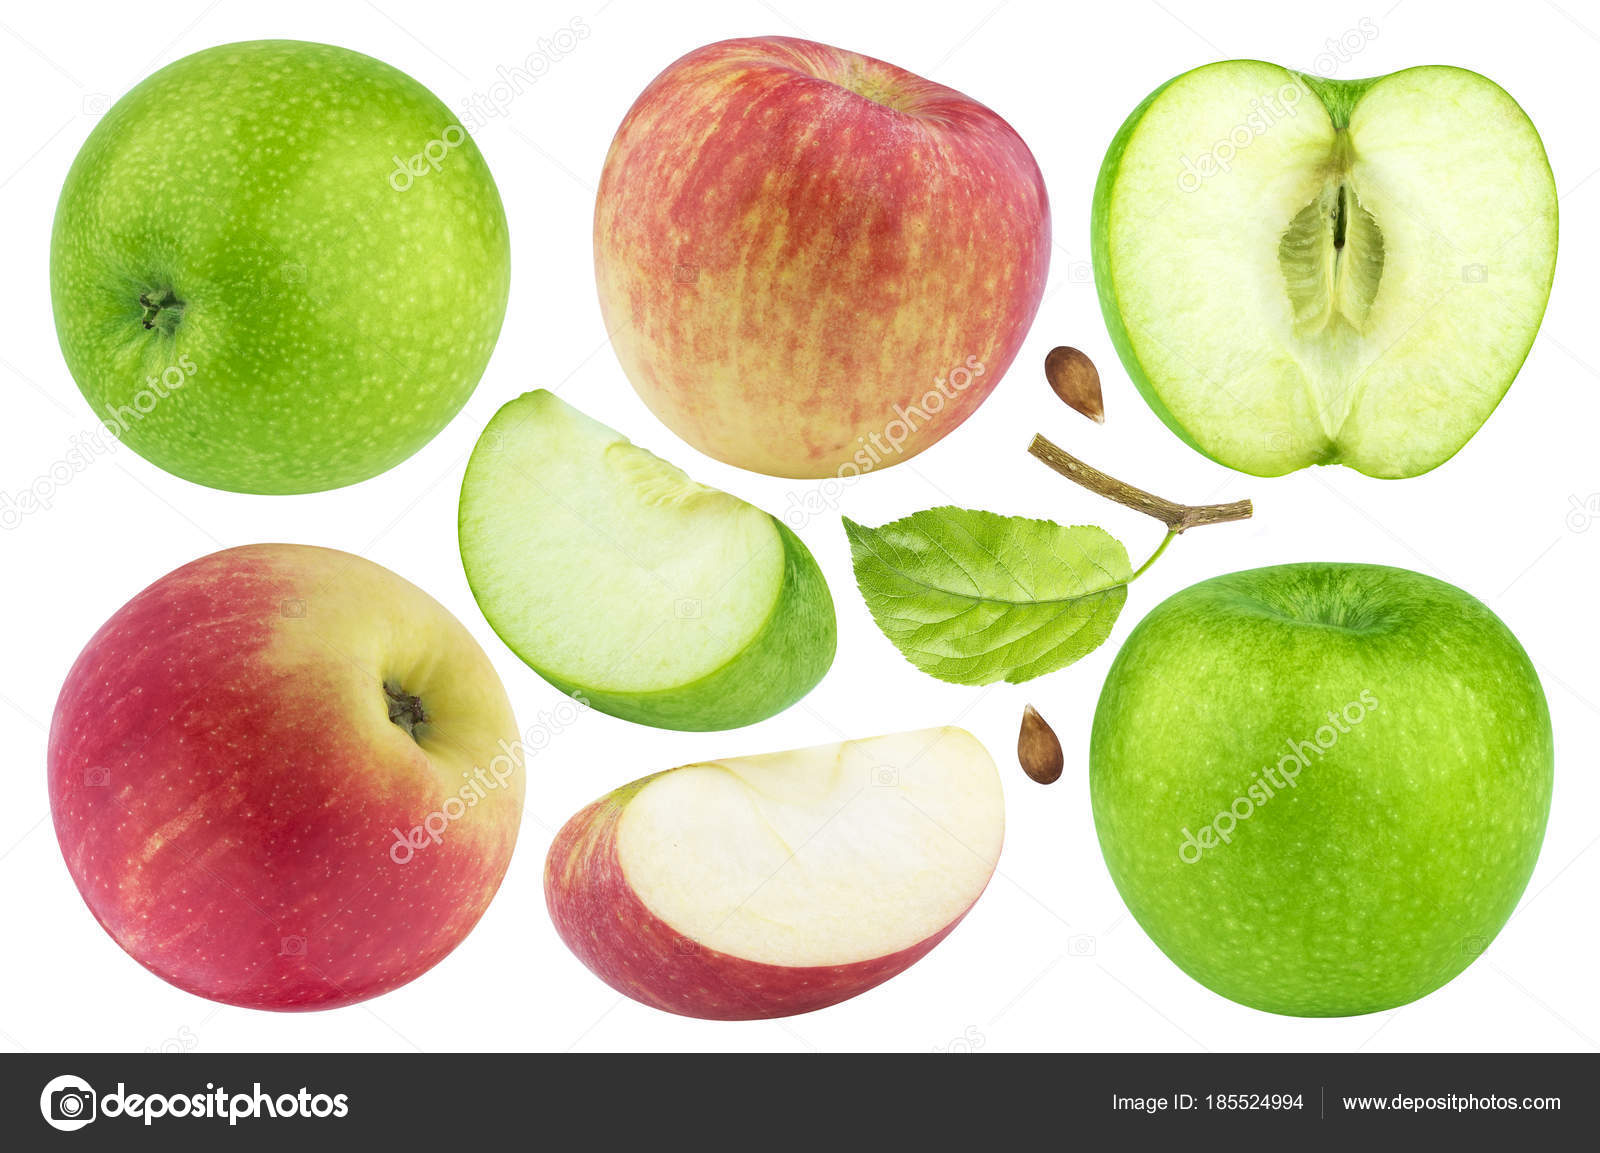 https://st3.depositphotos.com/5262887/18552/i/1600/depositphotos_185524994-stock-photo-green-and-red-apples-with.jpg